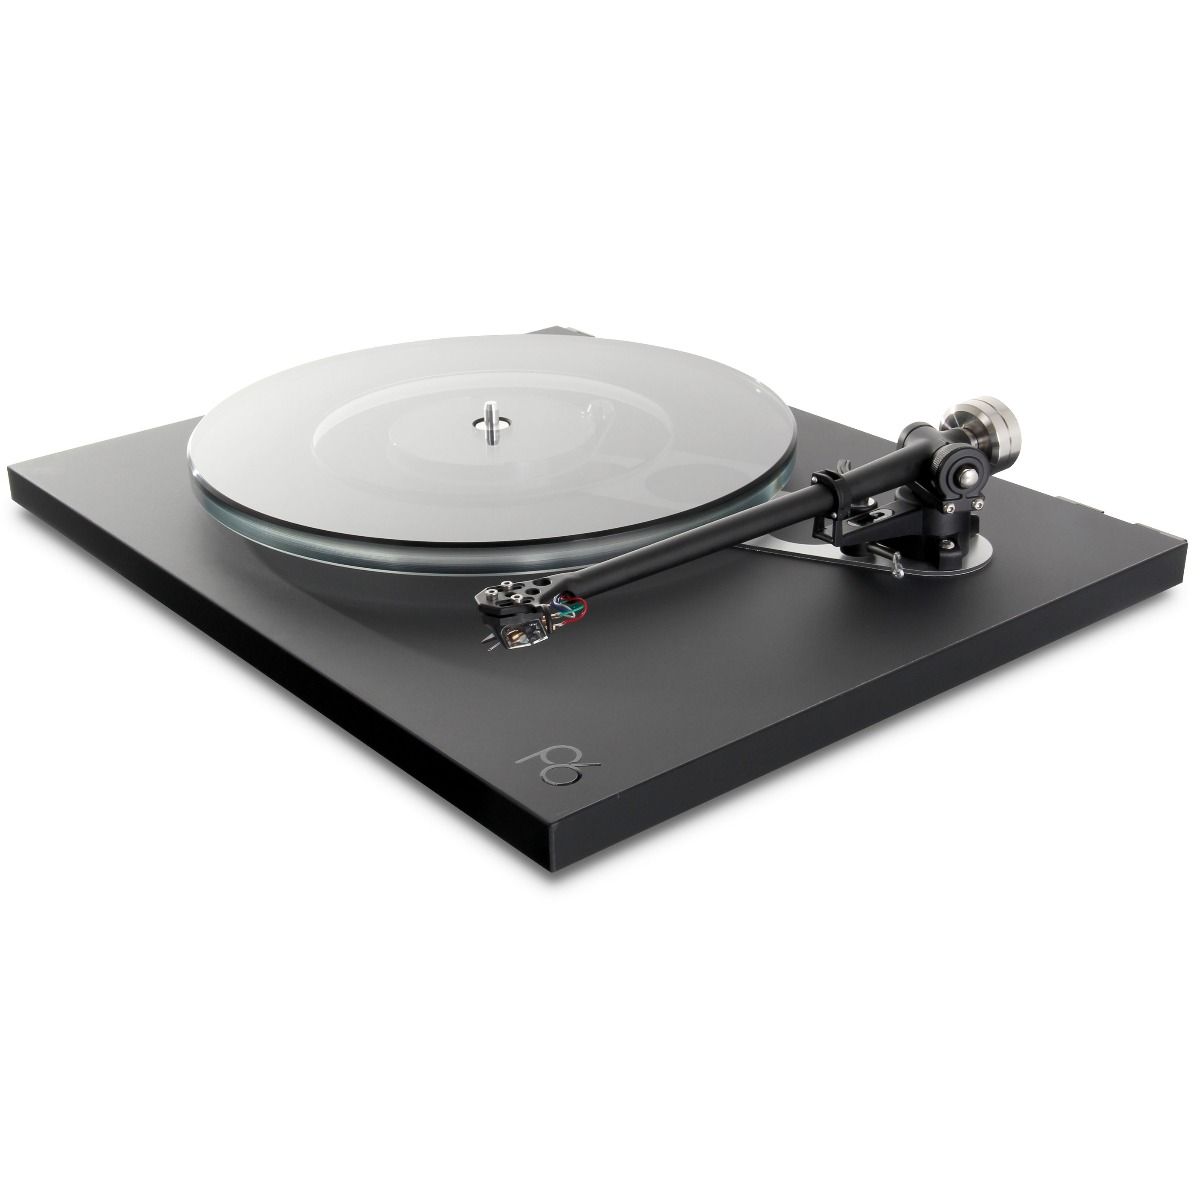 Rega Planar 6 Turntable - Polaris Gray - angled front view without dustcover